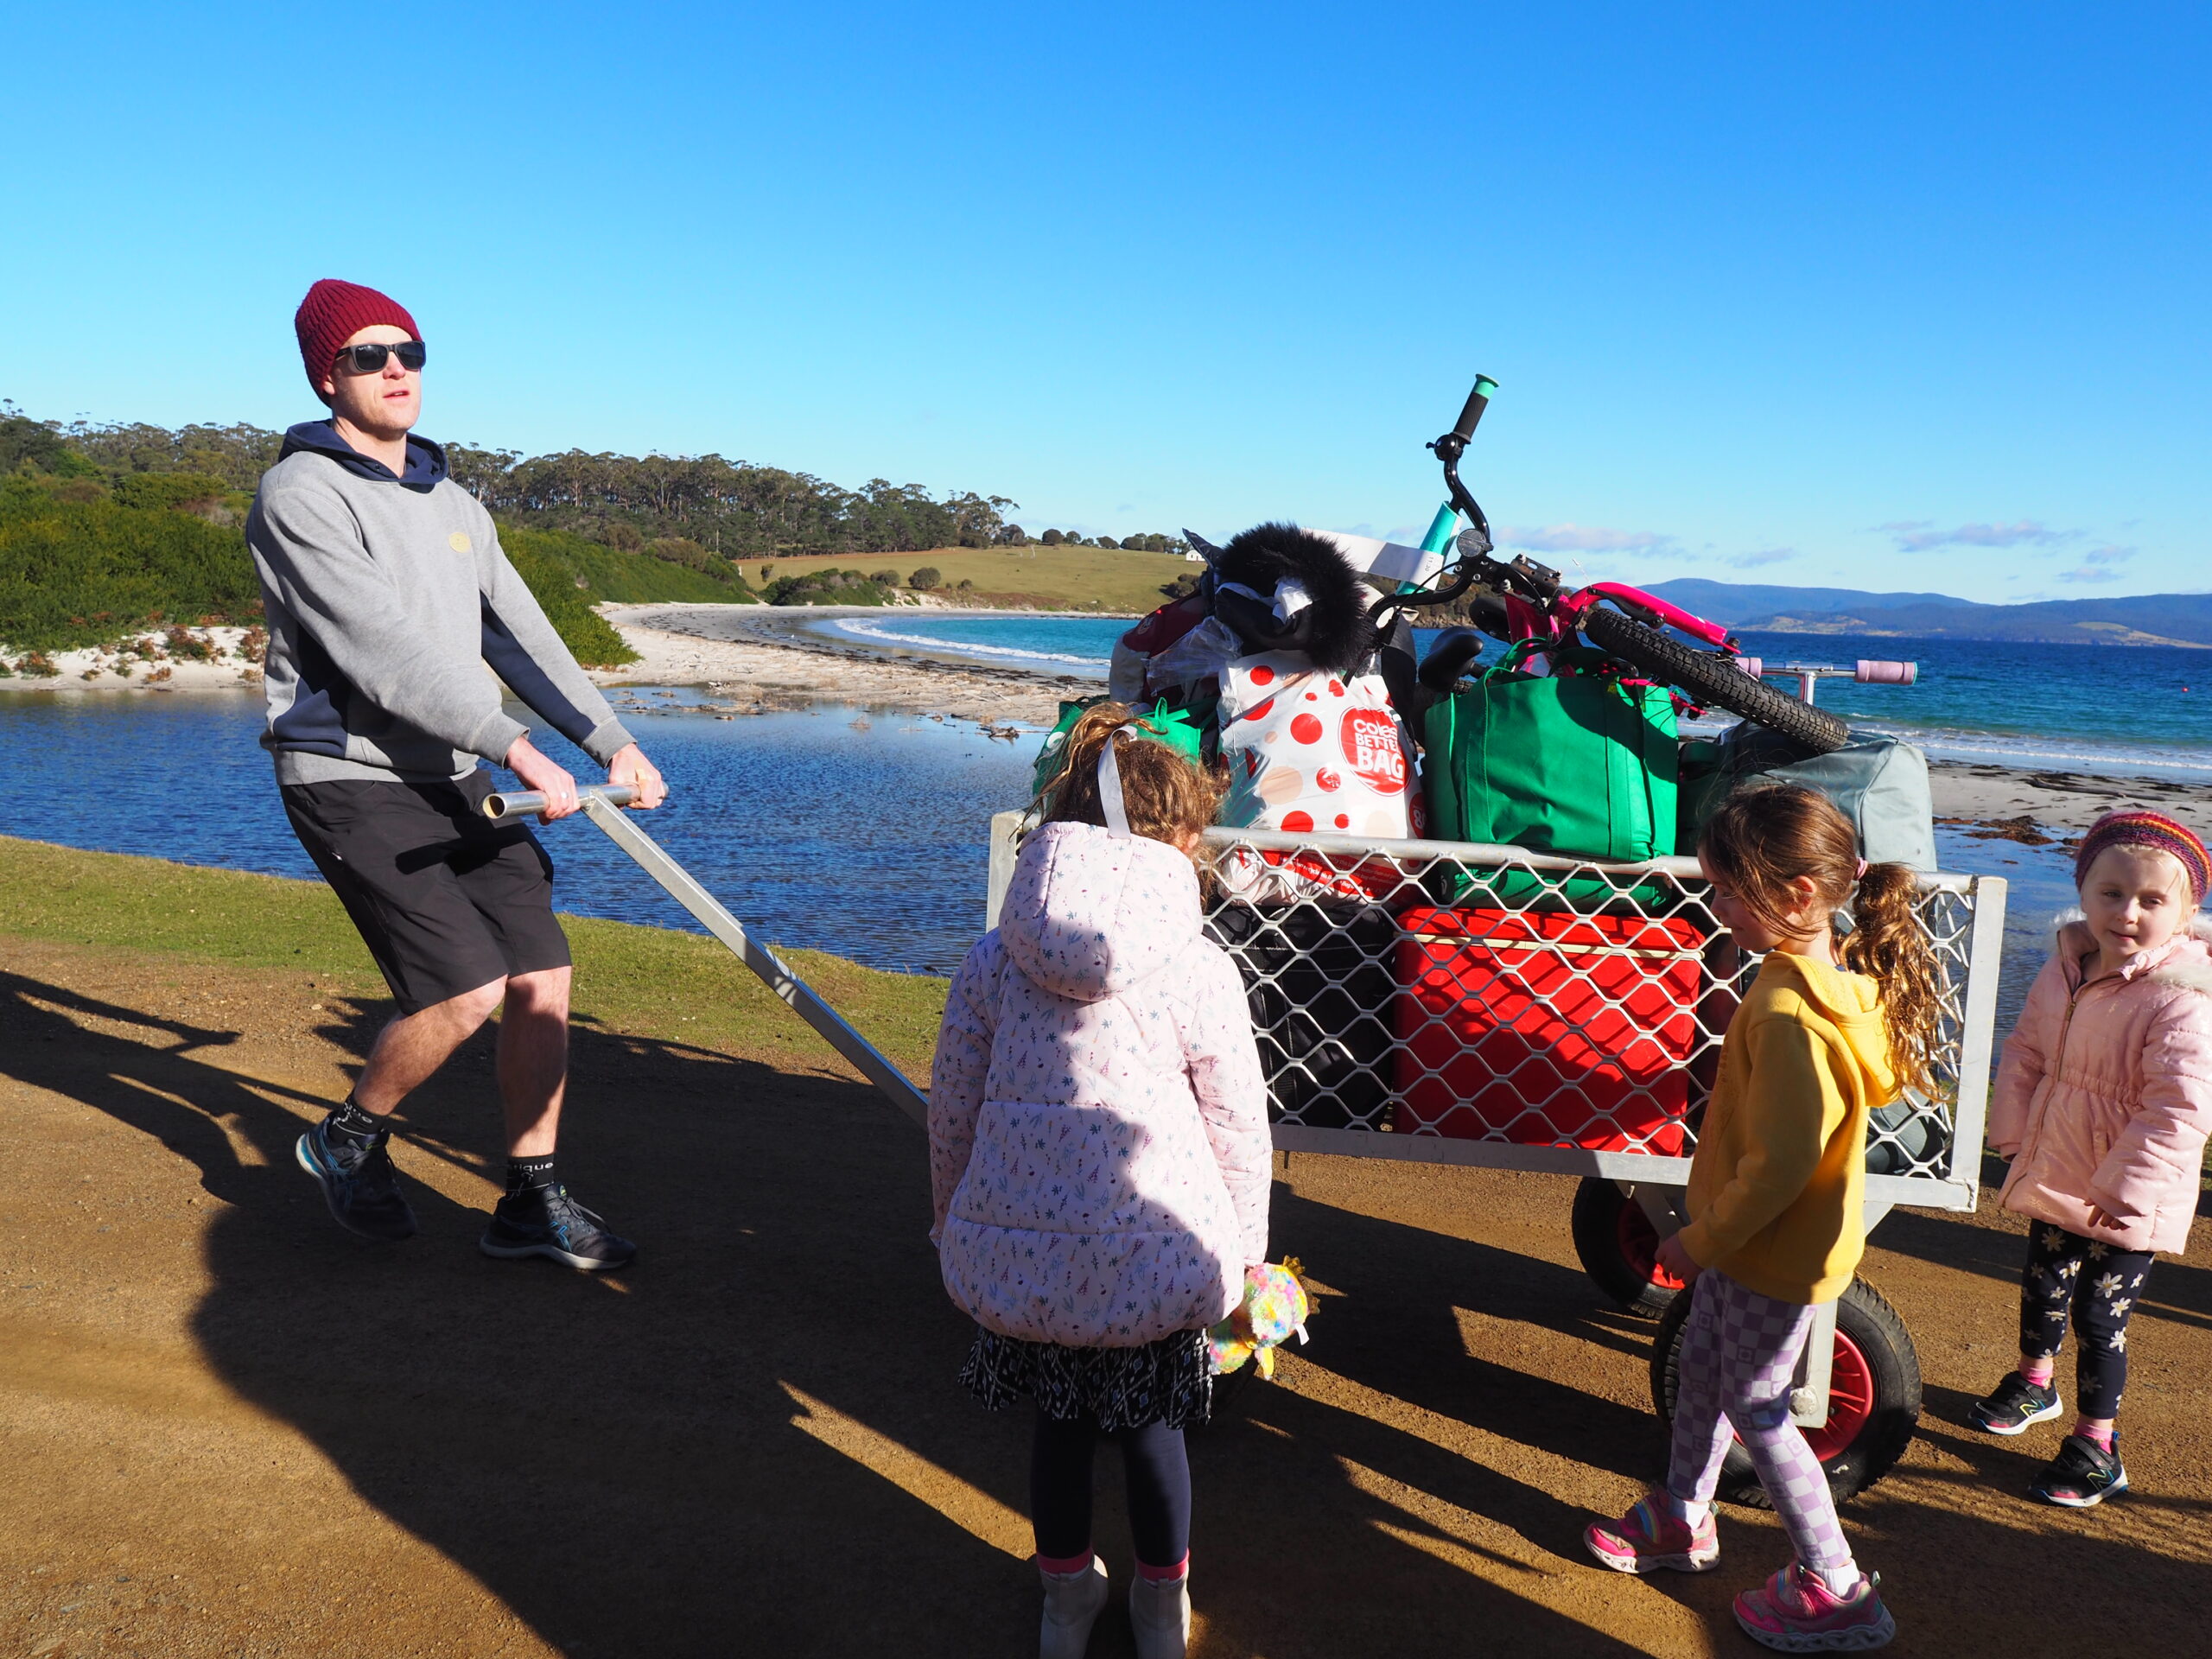 Picture of man hauling a caged trolley with luggage near the sea. Also shows three children